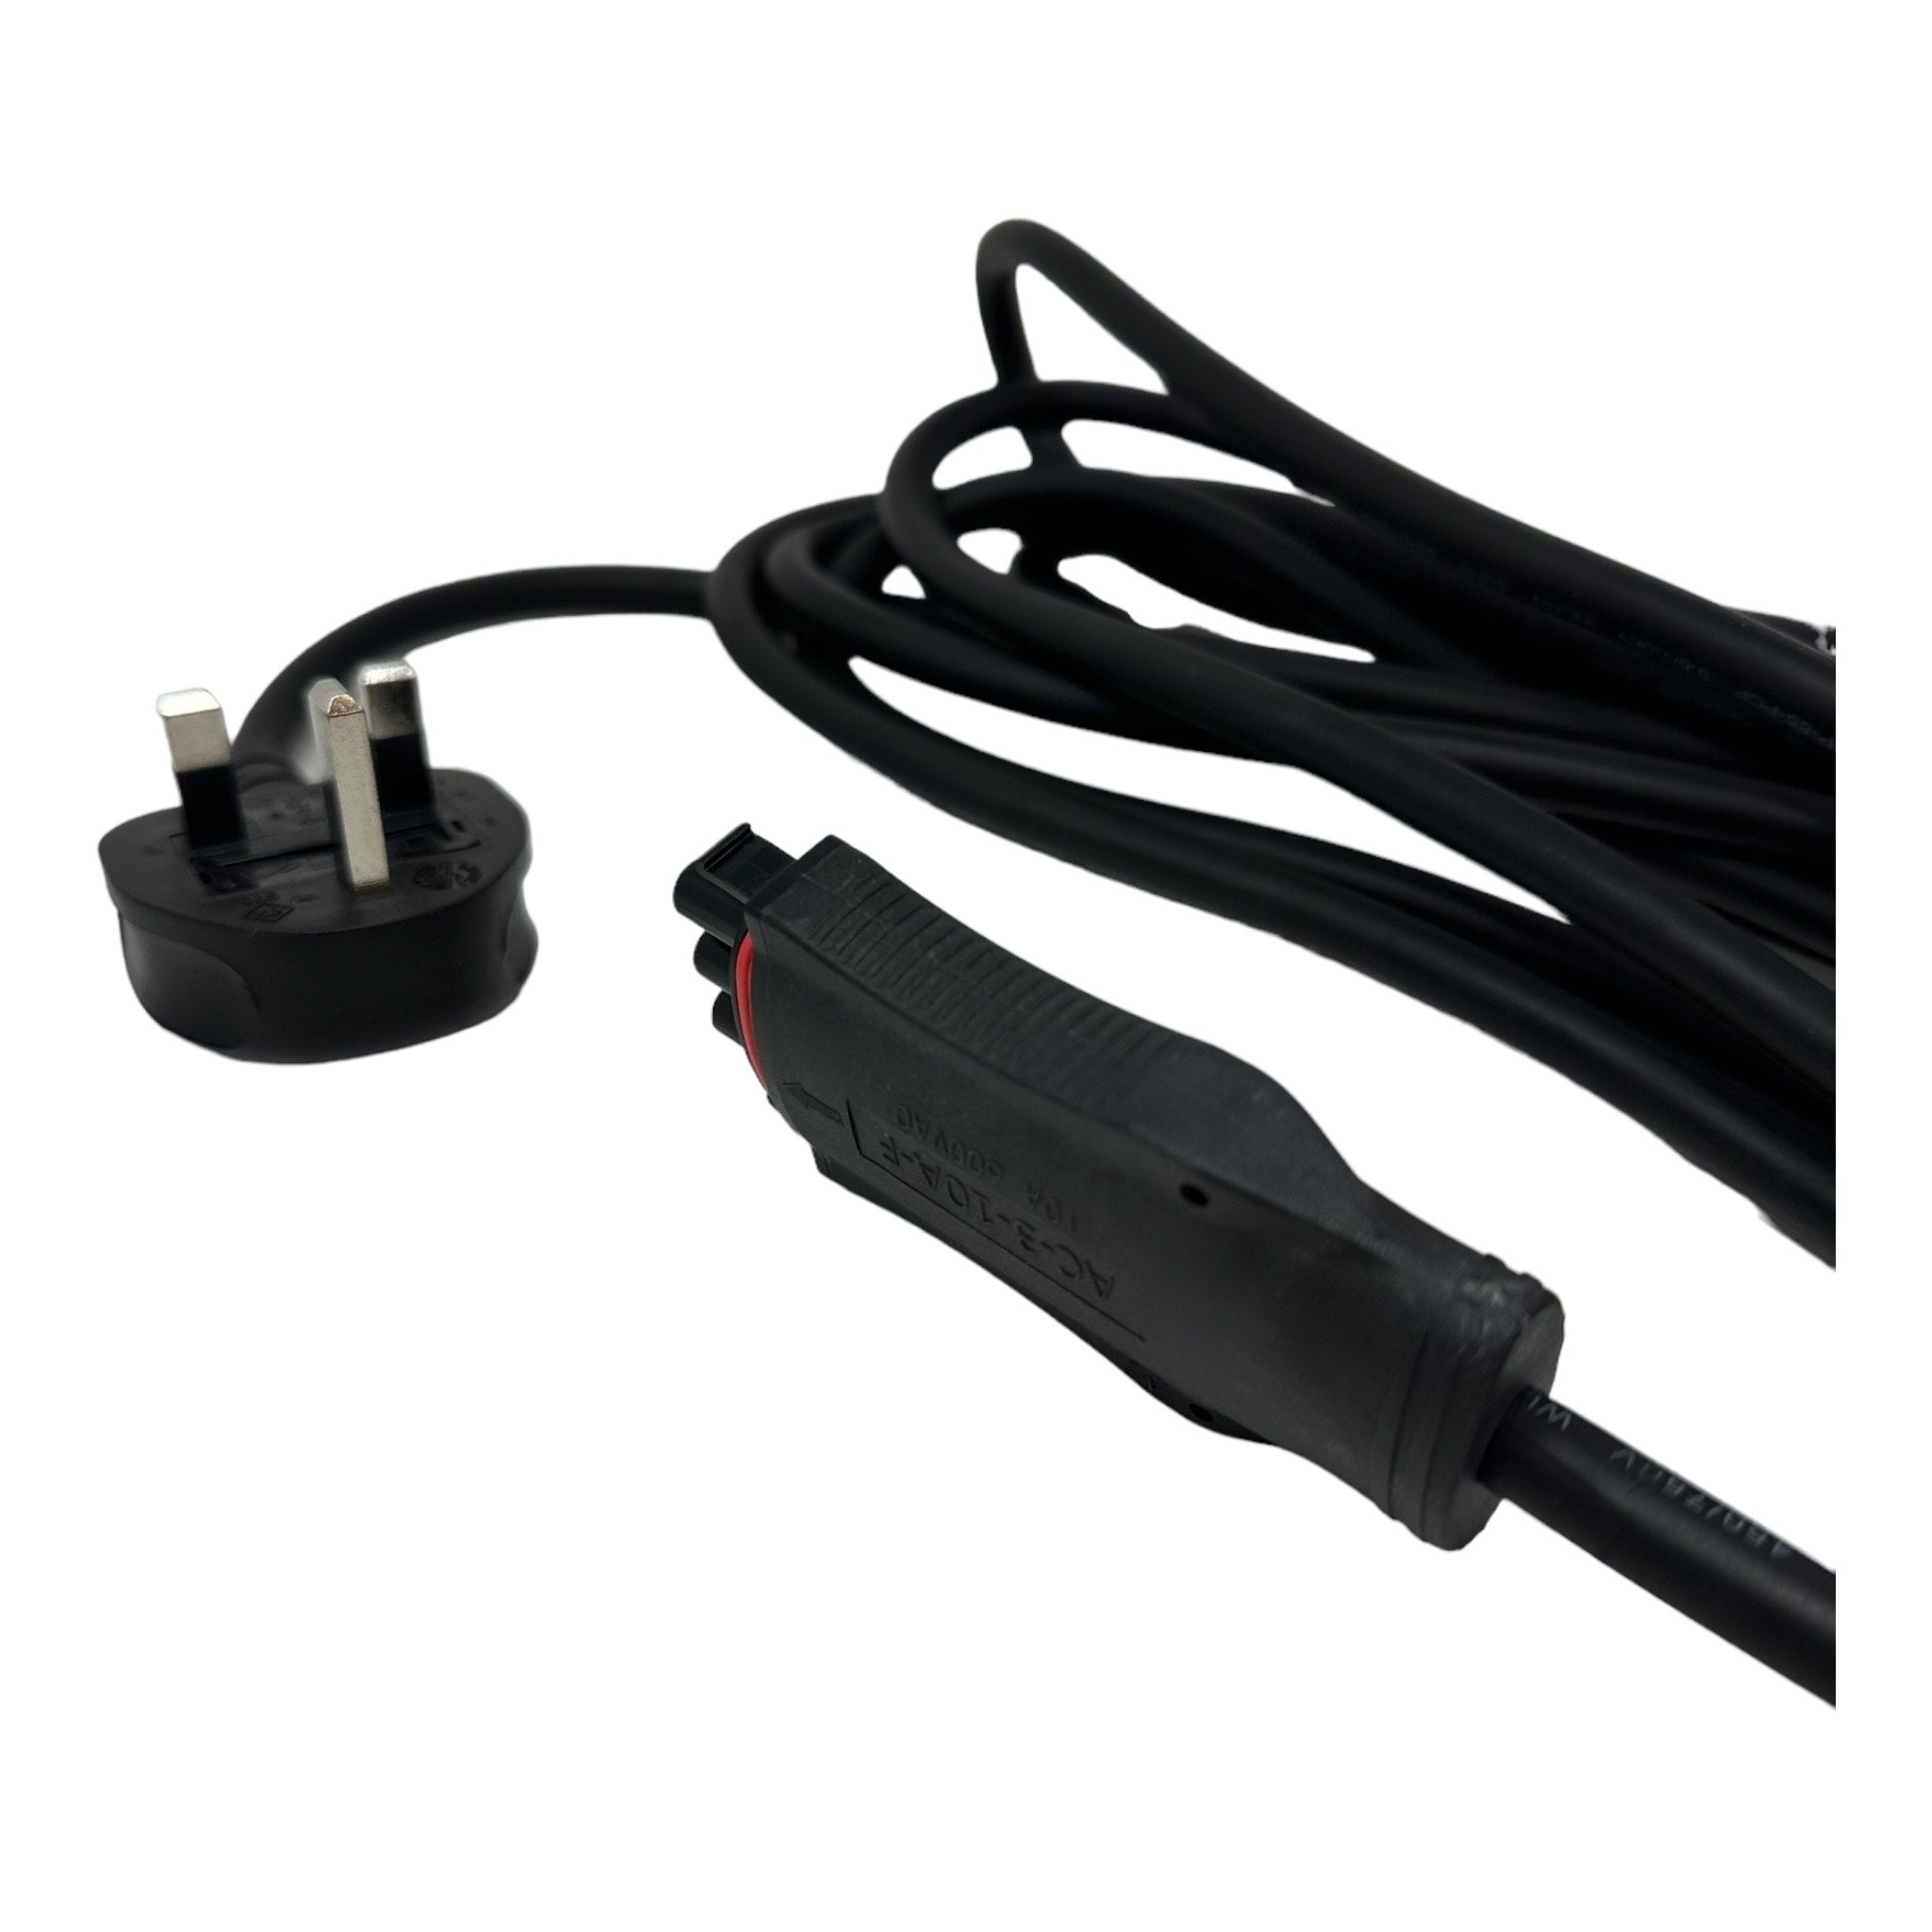 5 Meter Extension Cable for Micro Inverters With UK 3 Pin Plug or EU